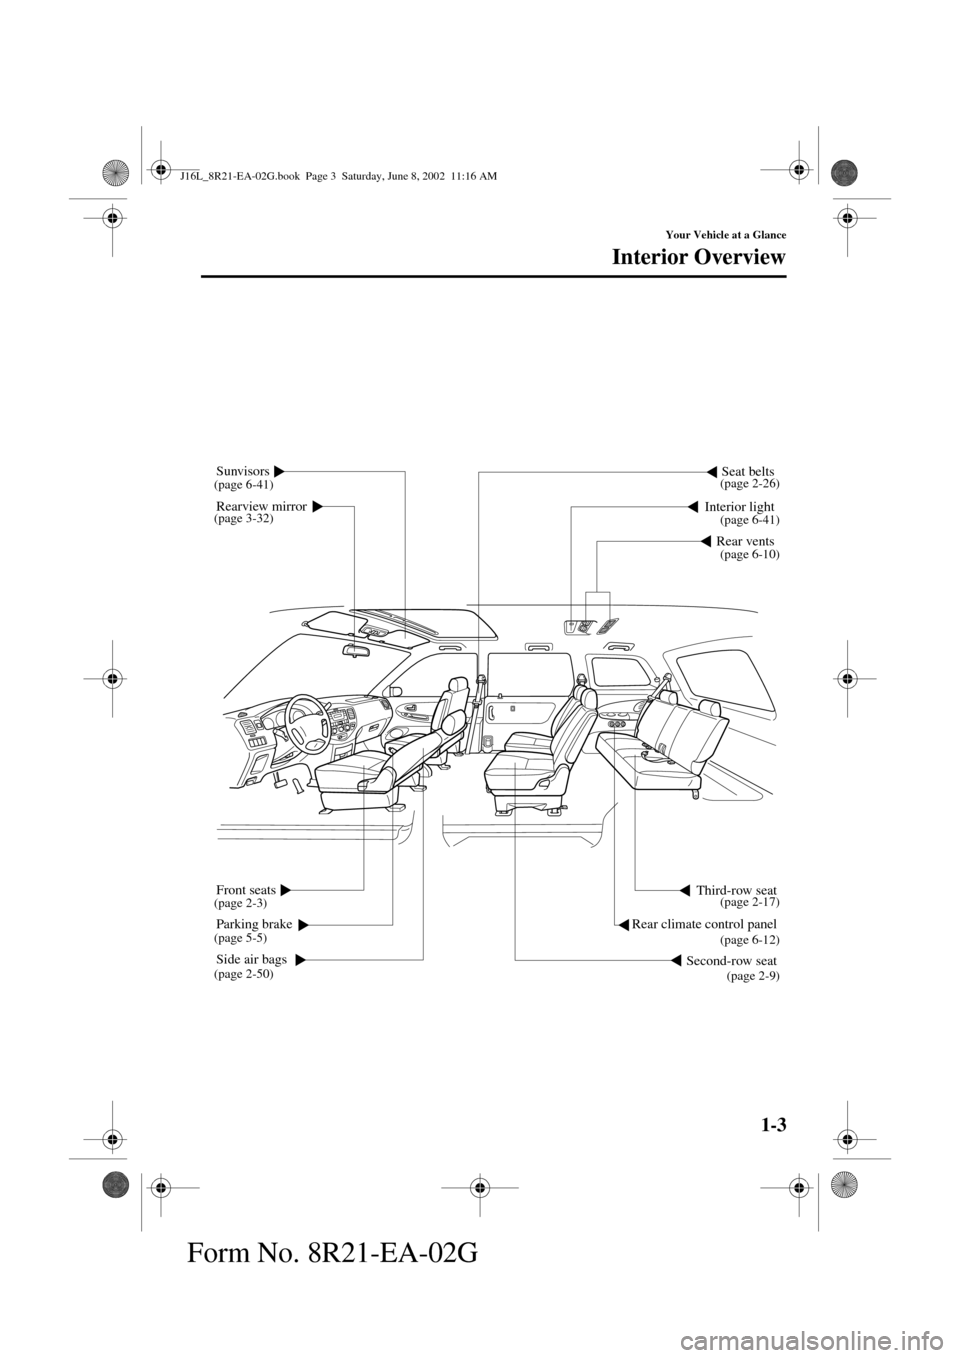 MAZDA MODEL MPV 2003  Owners Manual (in English) 1-3
Your Vehicle at a Glance
Form No. 8R21-EA-02G
Interior Overview
Rearview mirrorSeat beltsInterior light
Sunvisors
Front seats
Side air bagsSecond-row seat
Third-row seat
Parking brakeRear climate 